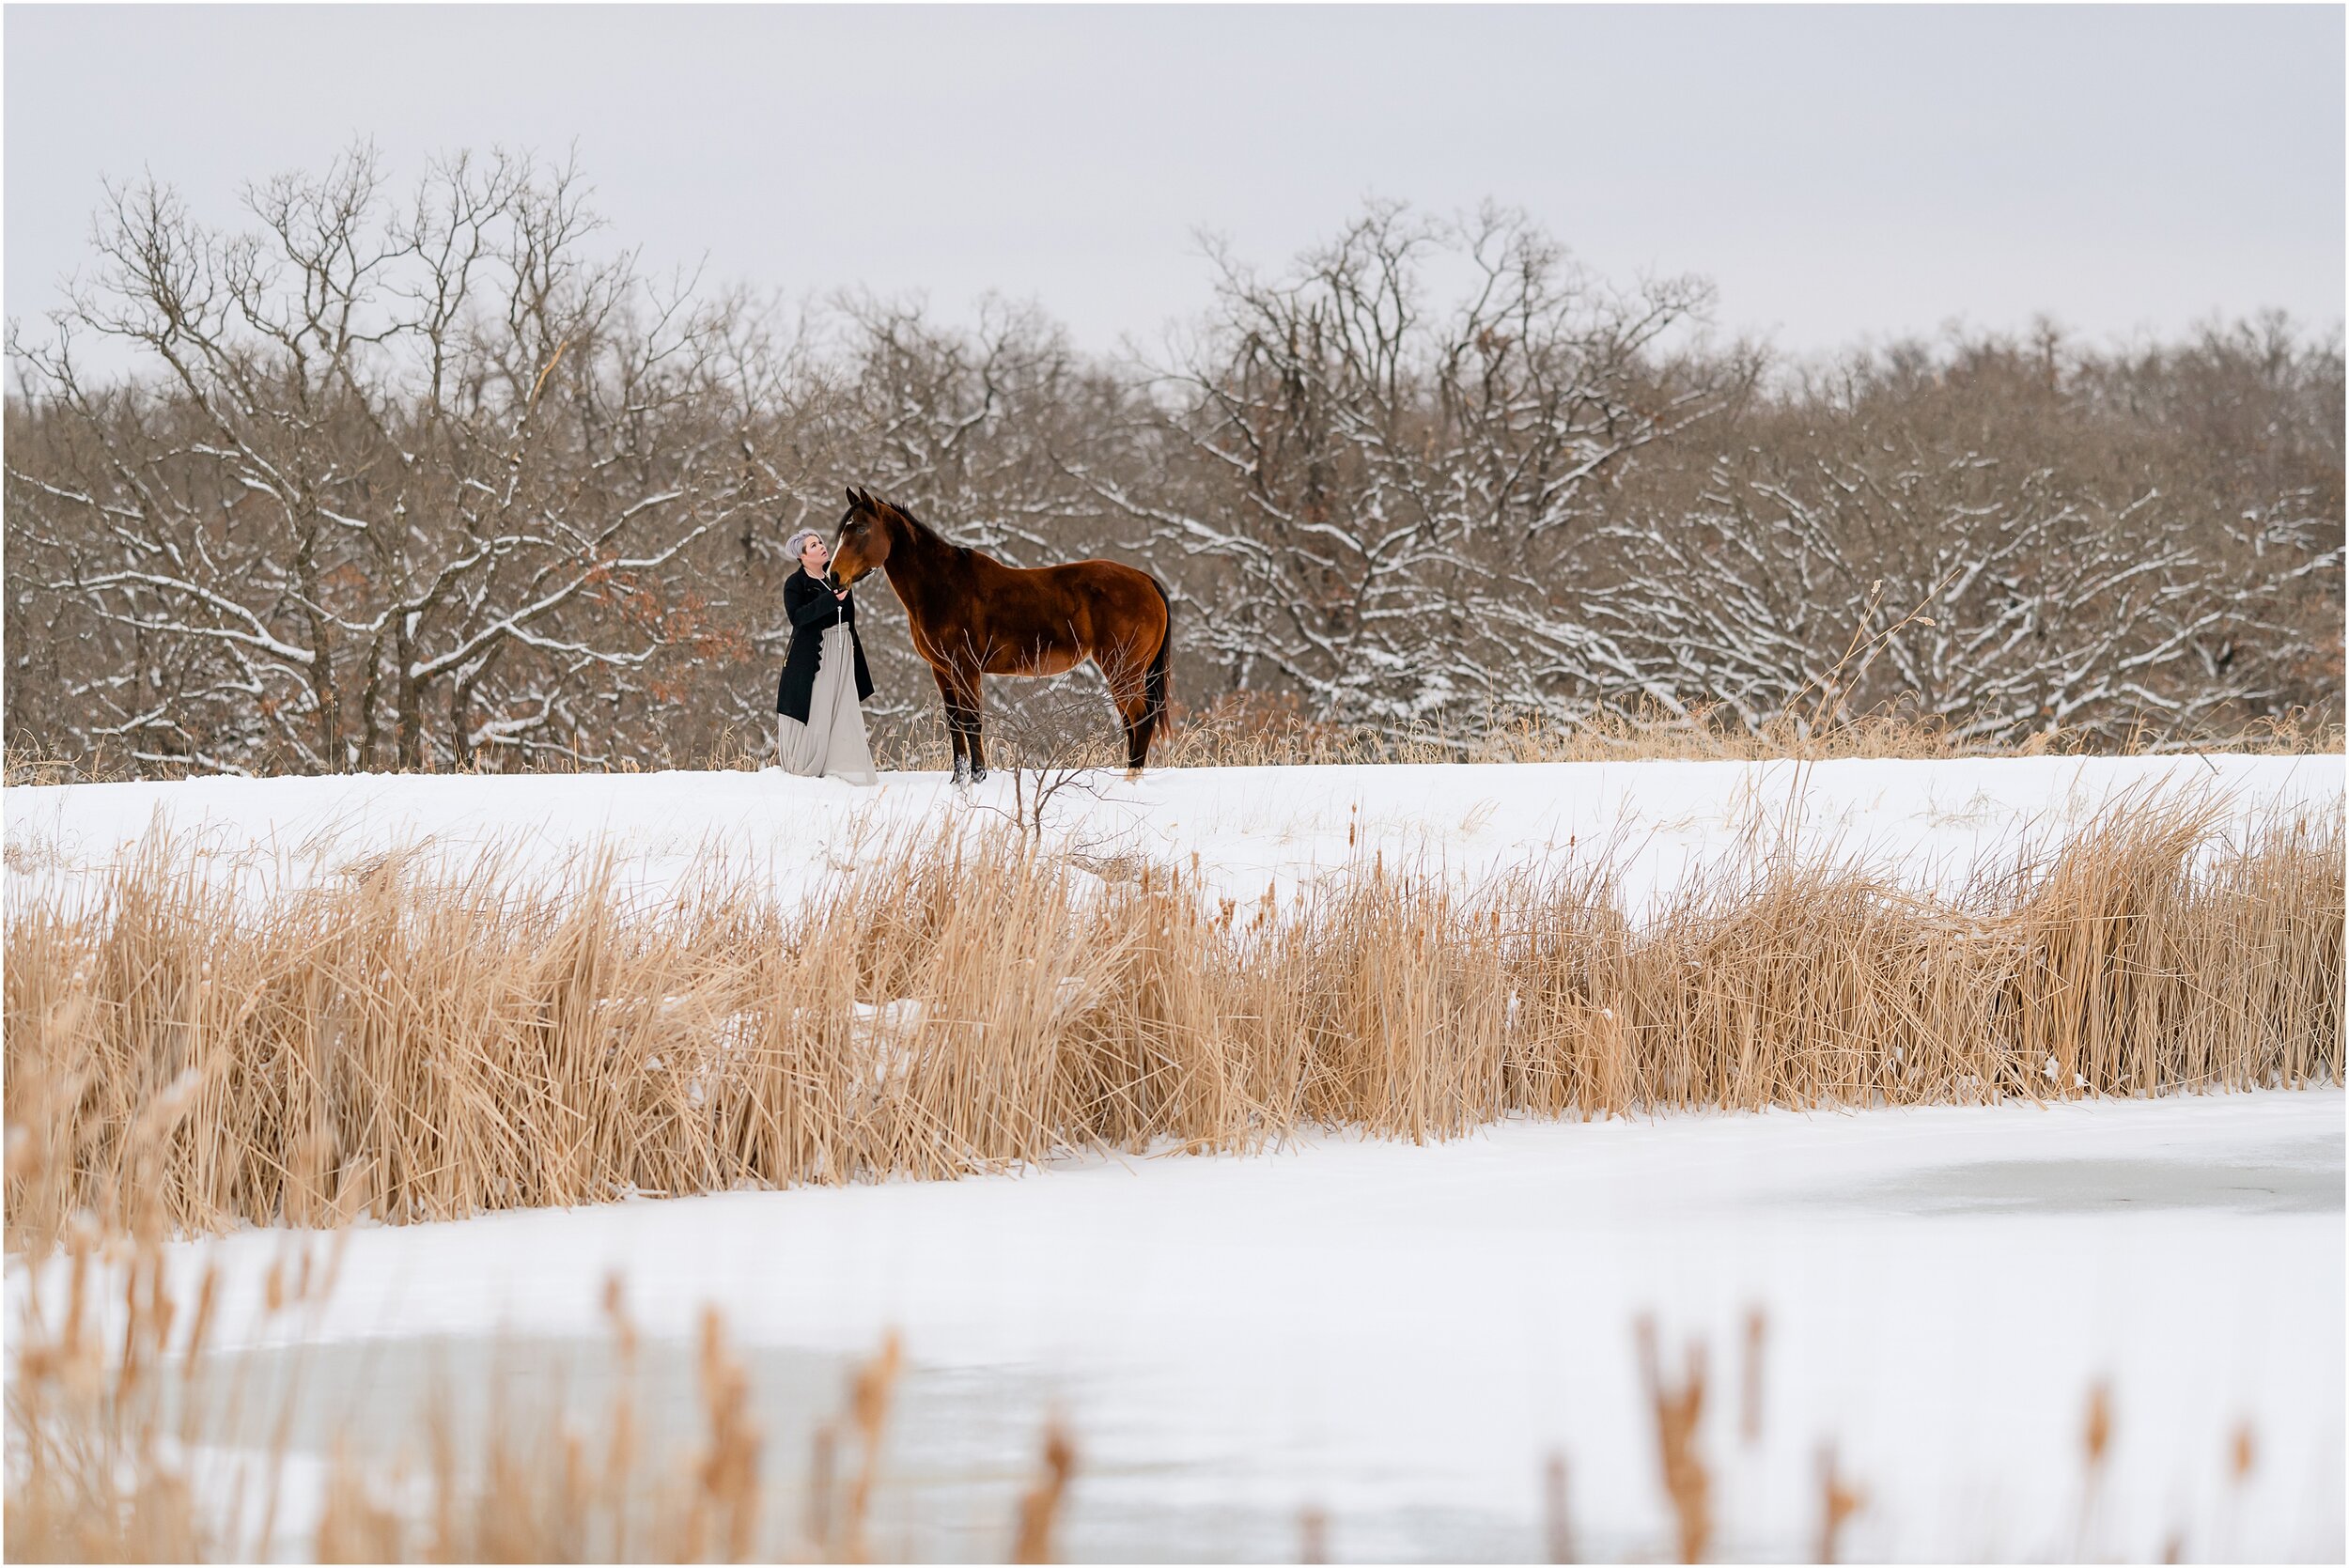  Landscape image of scenic edmond oklahoma in the snow, including a girl with short grey hair in a winter dressy outfit and her bay quarter horse mare. Posing for a girl and her horse in winter.  